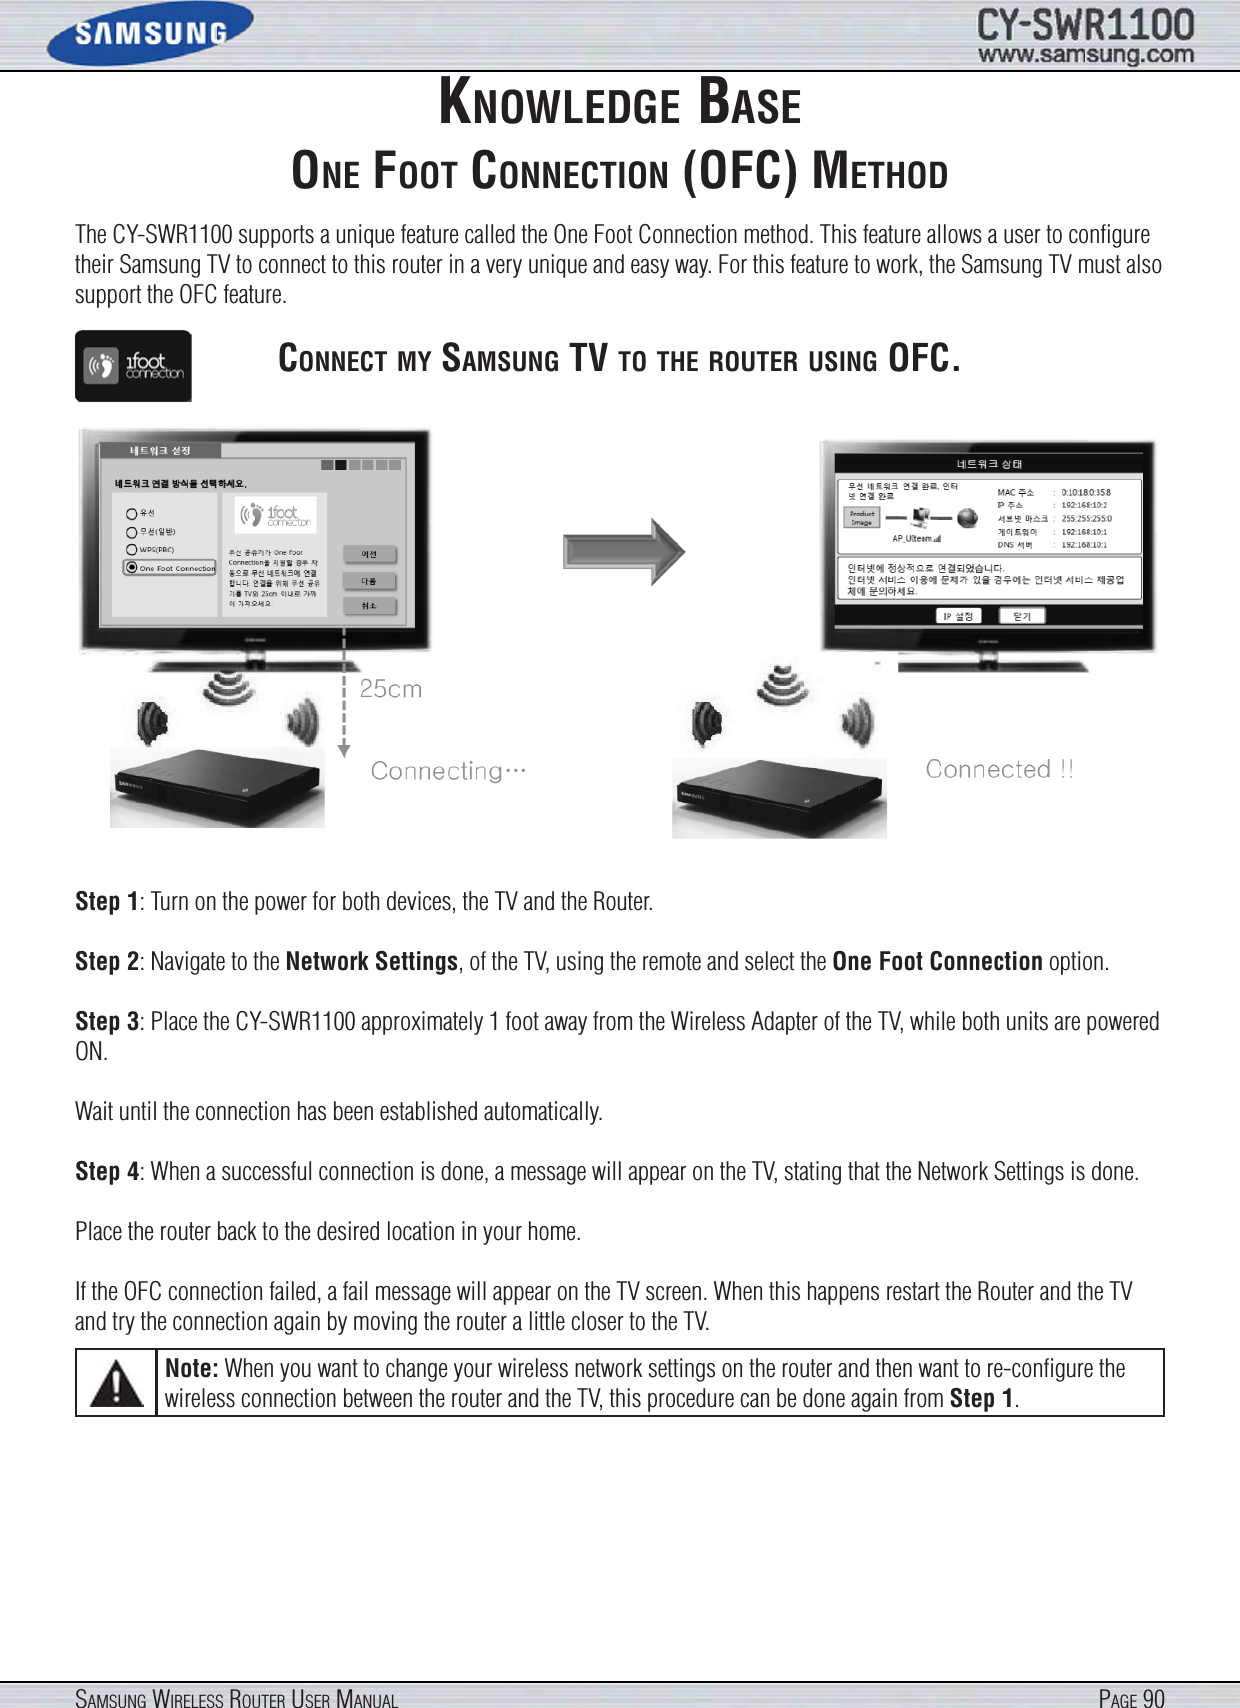 Page 90SamSung WireleSS router uSer manualknoWledge baSeone foot connectIon (ofc) methodThe CY-SWR1100 supports a unique feature called the One Foot Connection method. This feature allows a user to conﬁgure their Samsung TV to connect to this router in a very unique and easy way. For this feature to work, the Samsung TV must also support the OFC feature.connect my SamSung tV to the router uSIng ofc.Step 1: Turn on the power for both devices, the TV and the Router.Step 2: Navigate to the Network Settings, of the TV, using the remote and select the One Foot Connection option.Step 3: Place the CY-SWR1100 approximately 1 foot away from the Wireless Adapter of the TV, while both units are powered ON.Wait until the connection has been established automatically.Step 4: When a successful connection is done, a message will appear on the TV, stating that the Network Settings is done.Place the router back to the desired location in your home.If the OFC connection failed, a fail message will appear on the TV screen. When this happens restart the Router and the TV and try the connection again by moving the router a little closer to the TV.Note: When you want to change your wireless network settings on the router and then want to re-conﬁgure the wireless connection between the router and the TV, this procedure can be done again from Step 1.